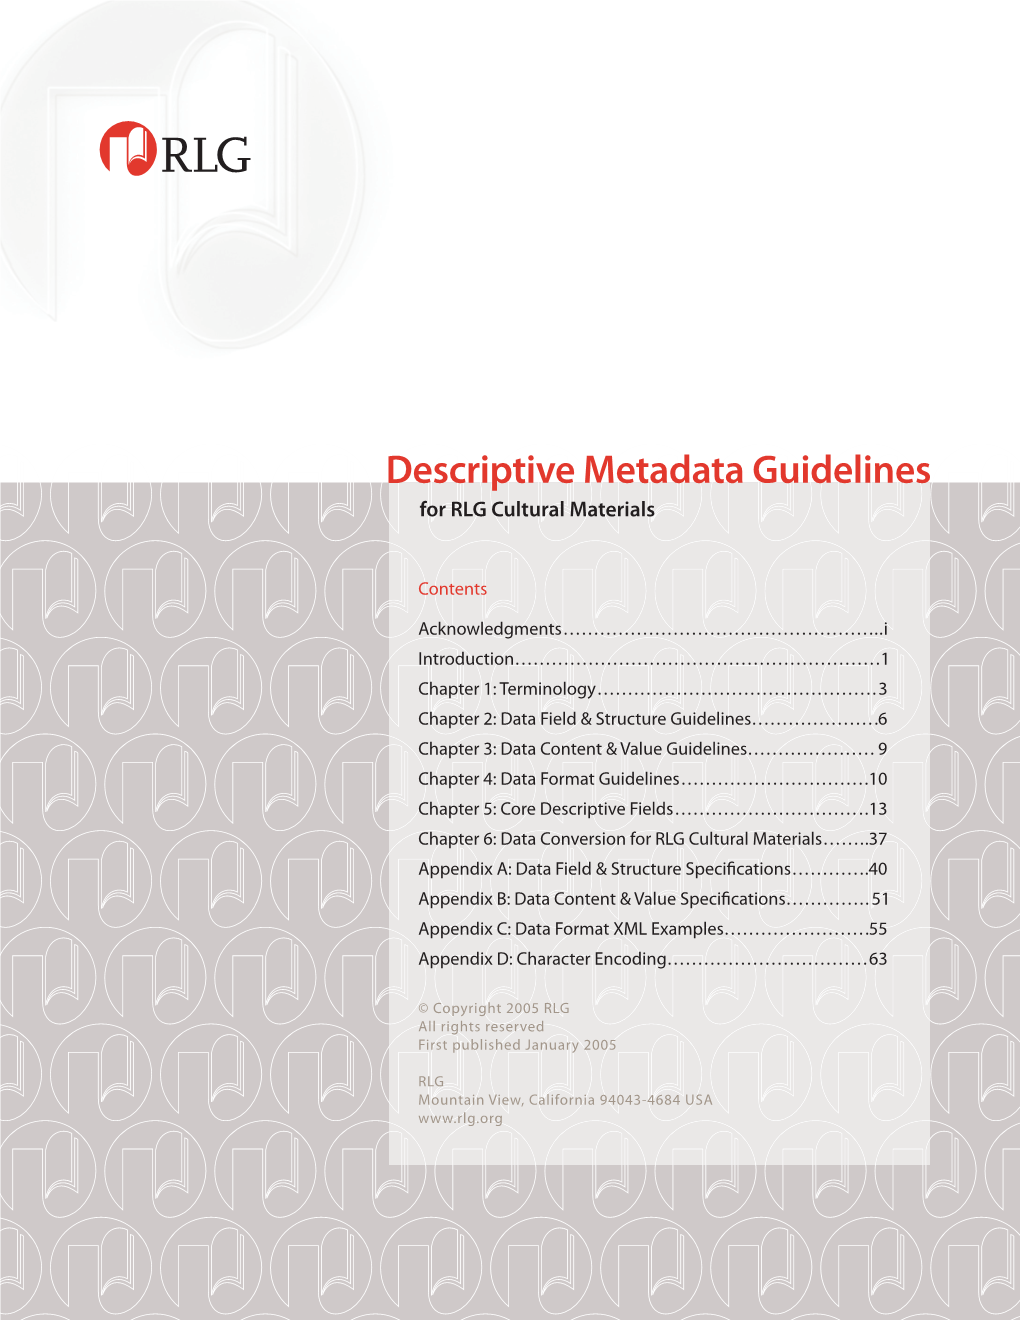 Descriptive Metadata Guidelines for RLG Cultural Materials I Many Thanks Also to These Individuals Who Reviewed the Final Draft of the Document